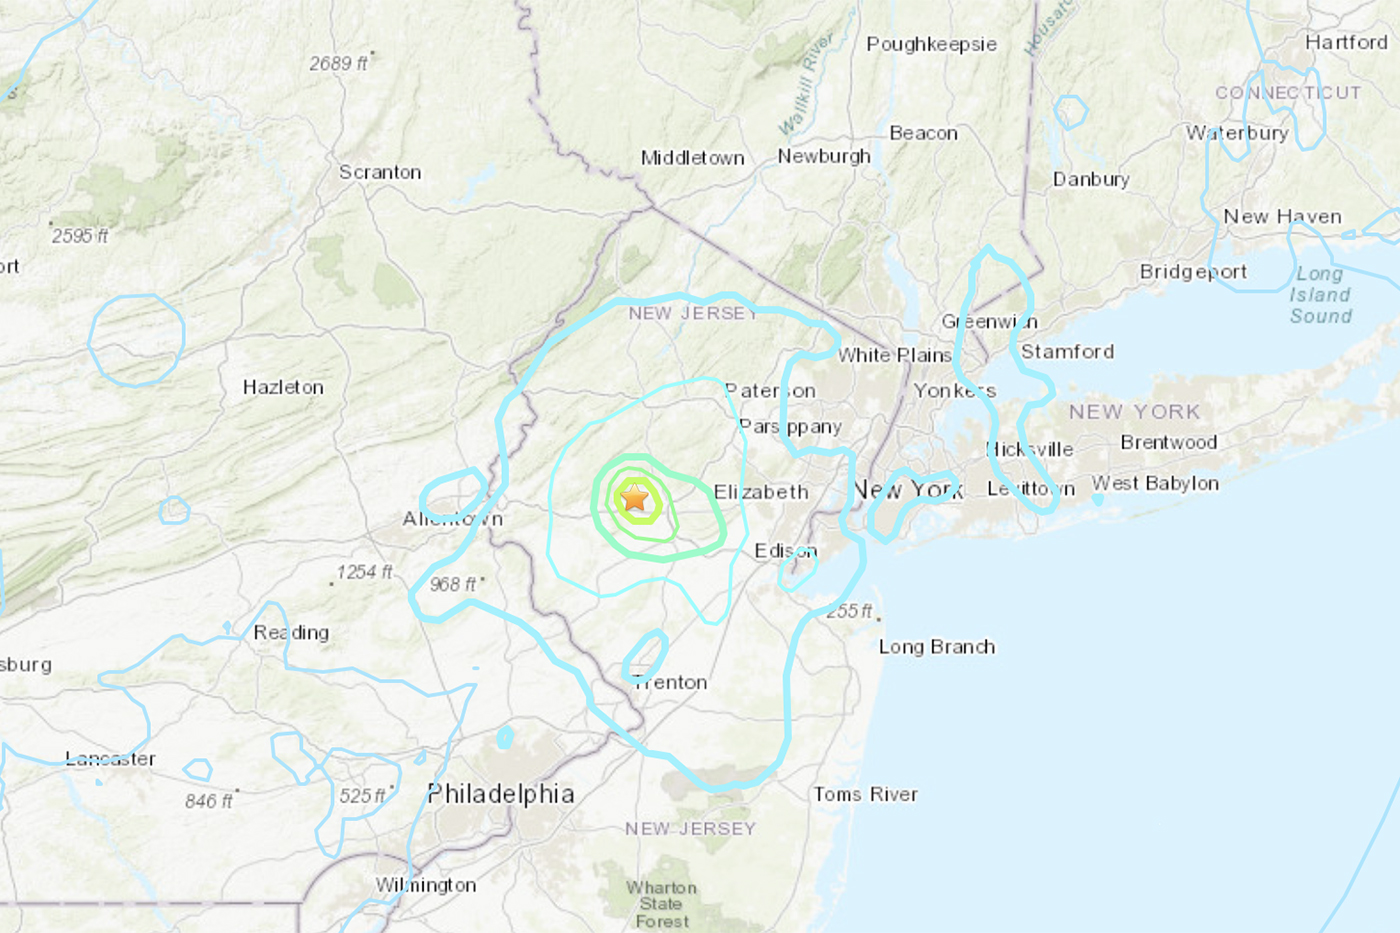 New Jersey earthquake raises questions about East Coast preparedness